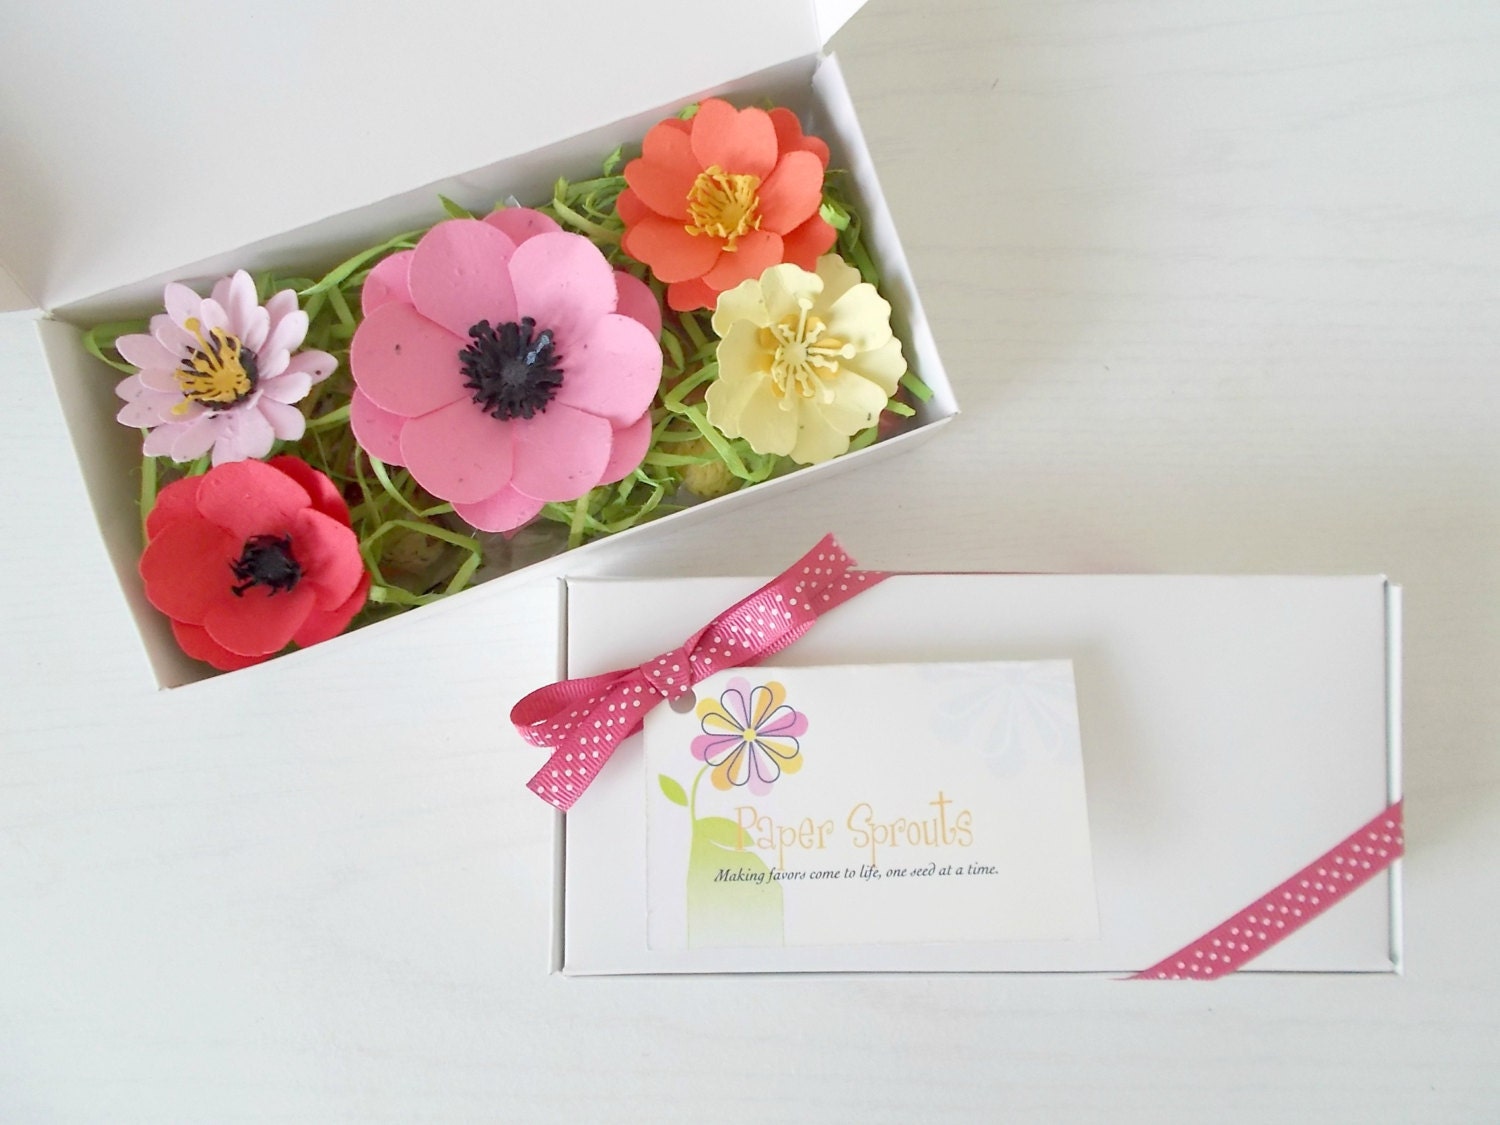 Plantable Paper Flower and Seed Bomb Sample Set - Unique Gardening Gift - Eco Friendly Paper Embedded with Flower Seeds!